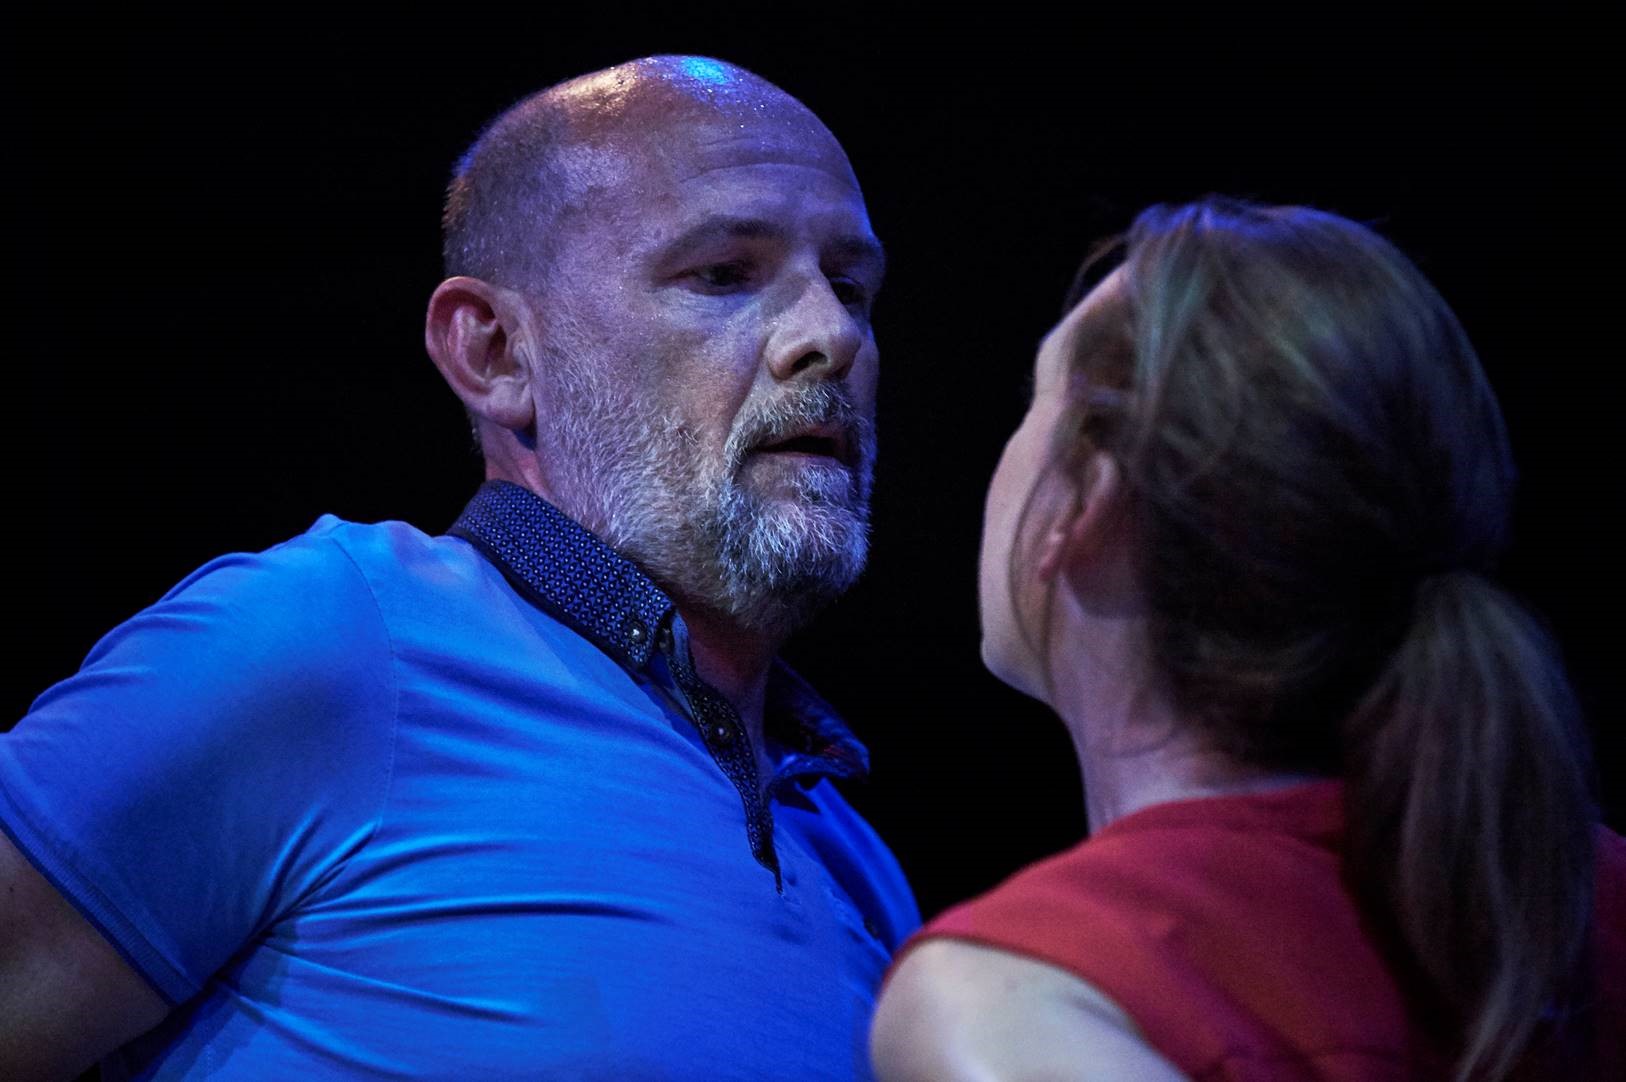 Paul Hickey and Cathy Belton in Helen and I by Meadhbh McHugh